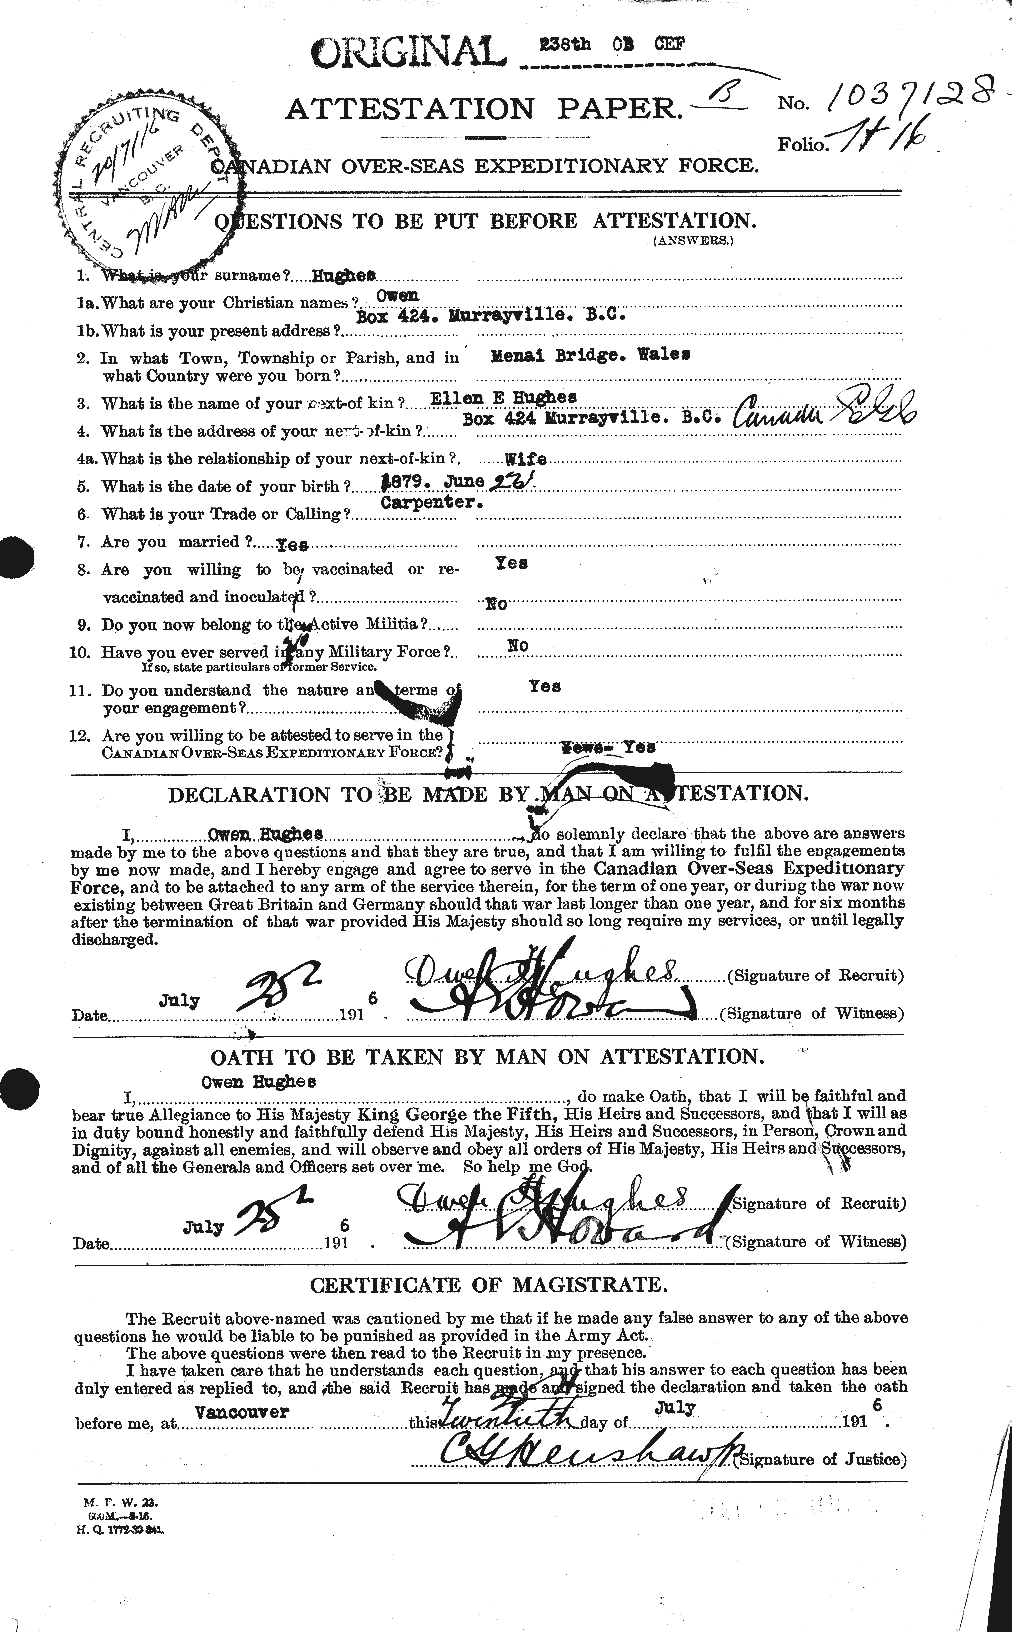 Personnel Records of the First World War - CEF 404139a